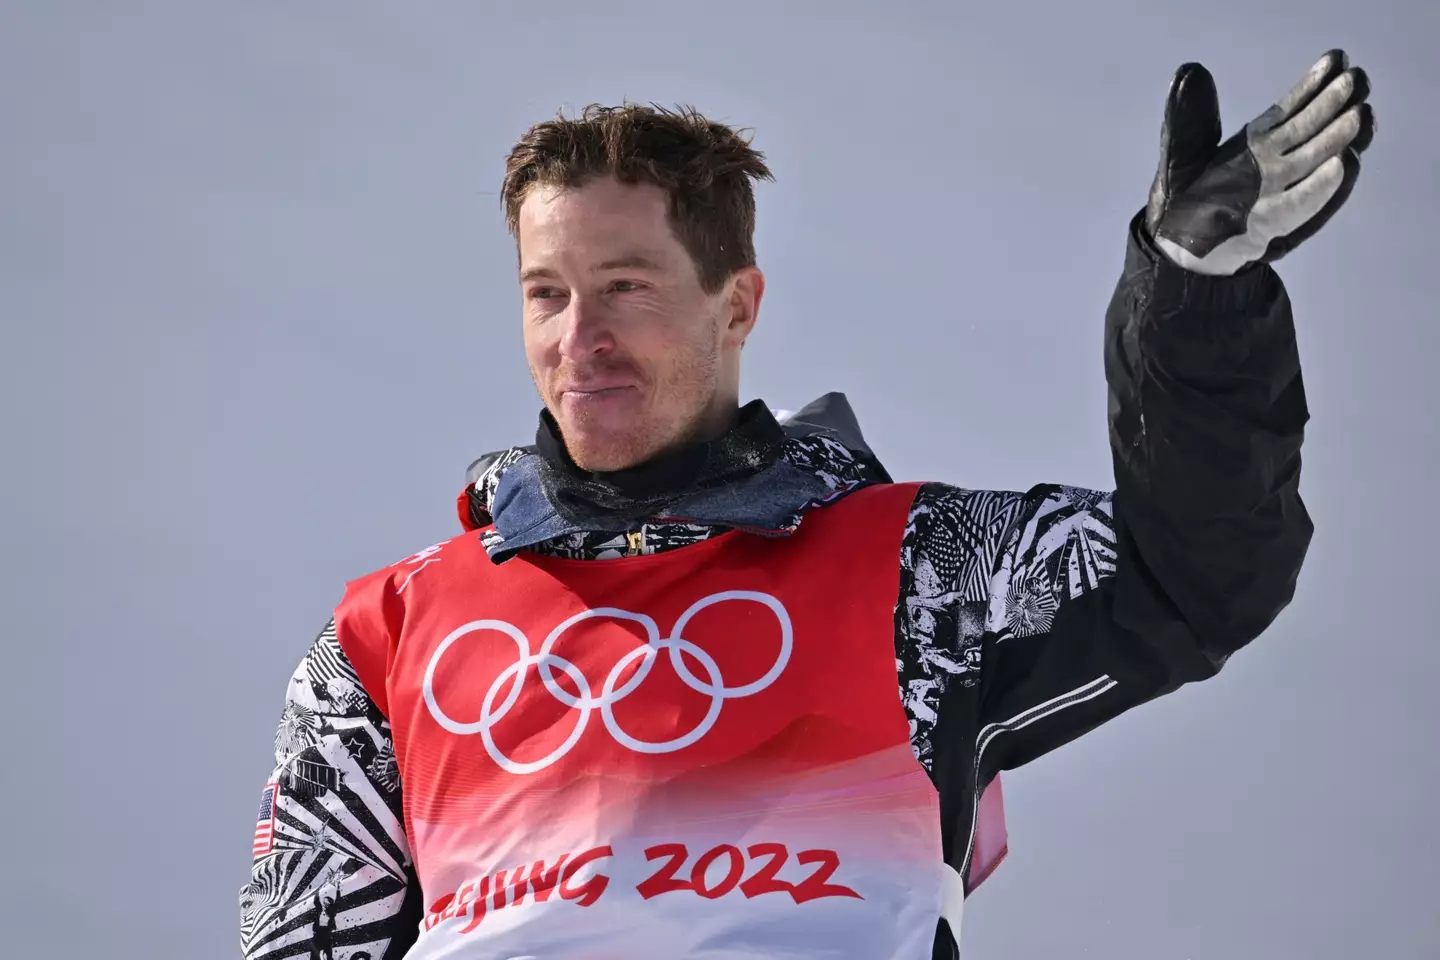 Shaun White at the 2022 Beijing Winter Olympic Games.